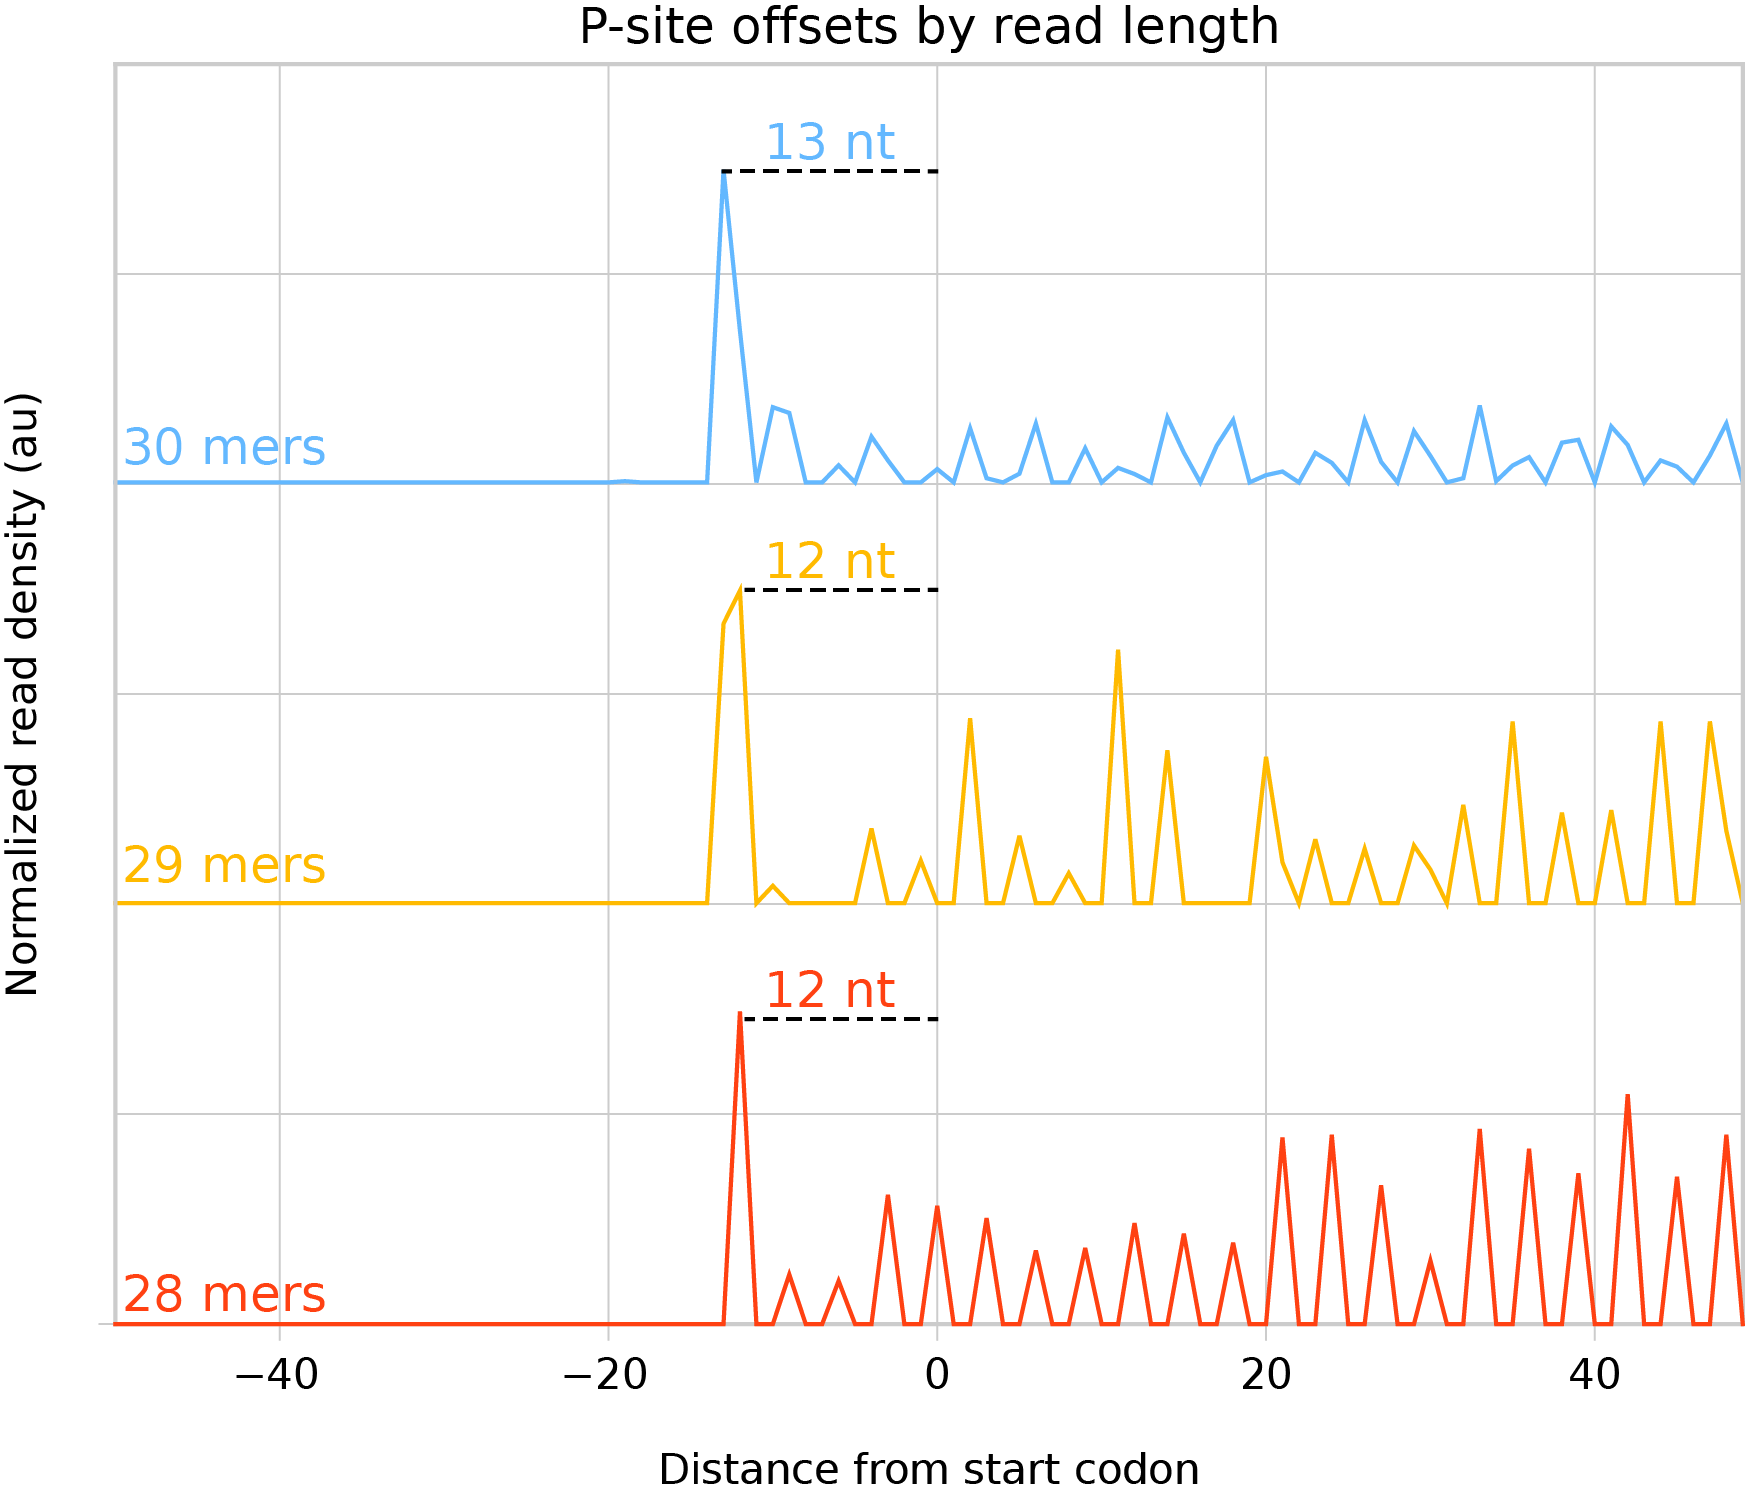 P-site offsets, by read length